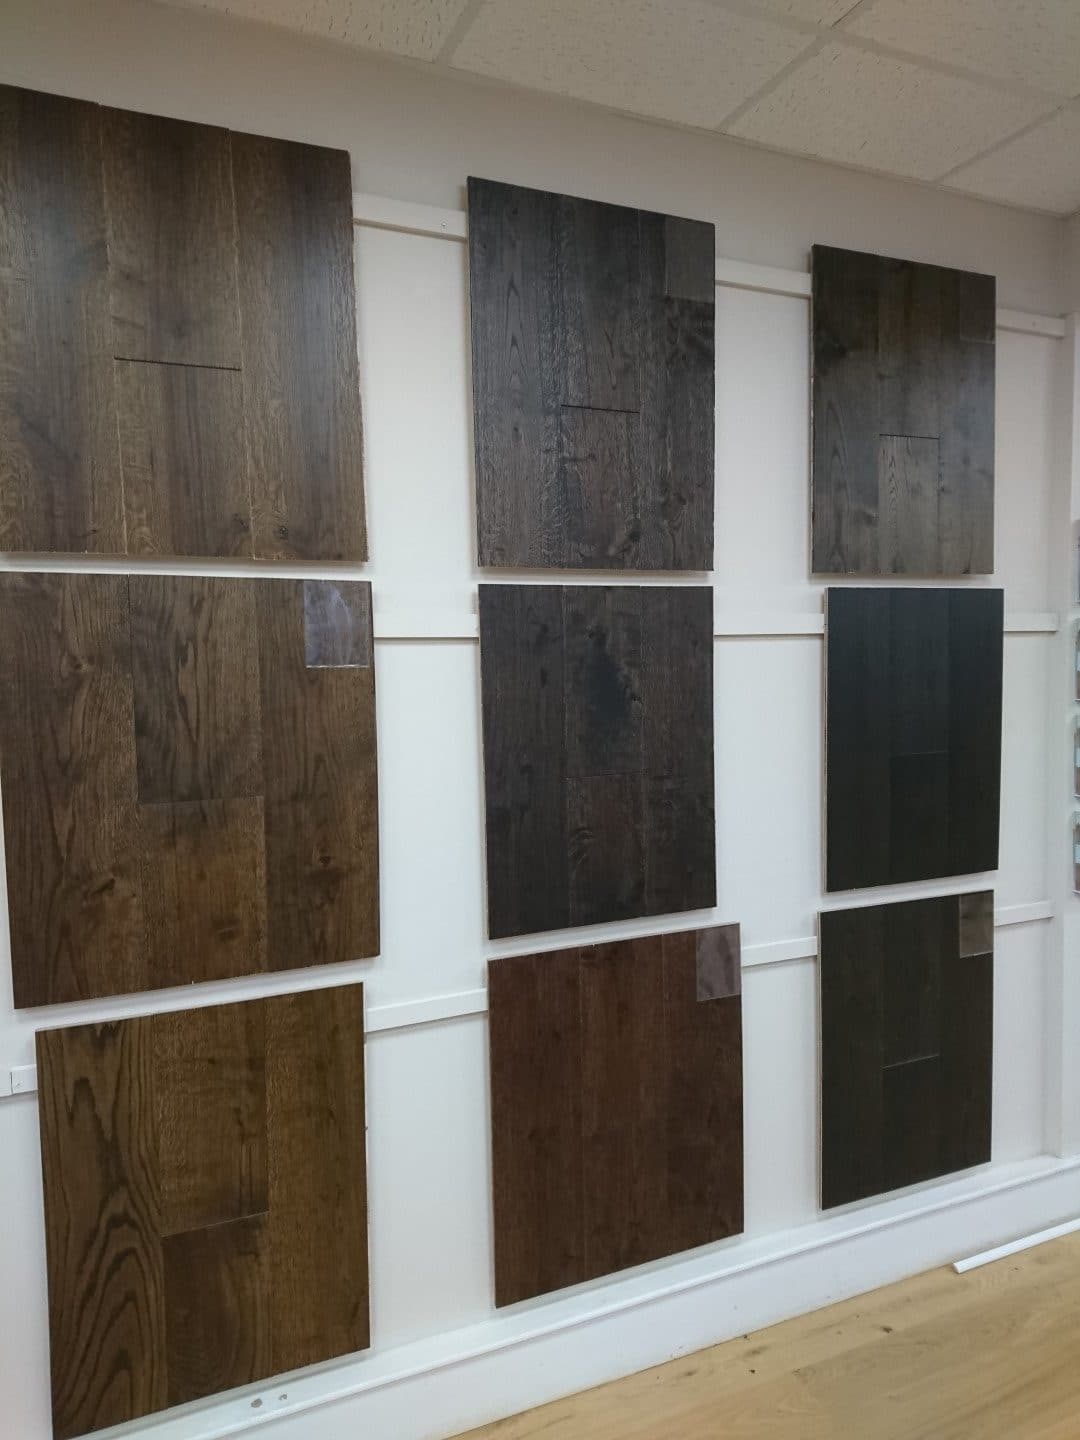 Exciting new finishes!